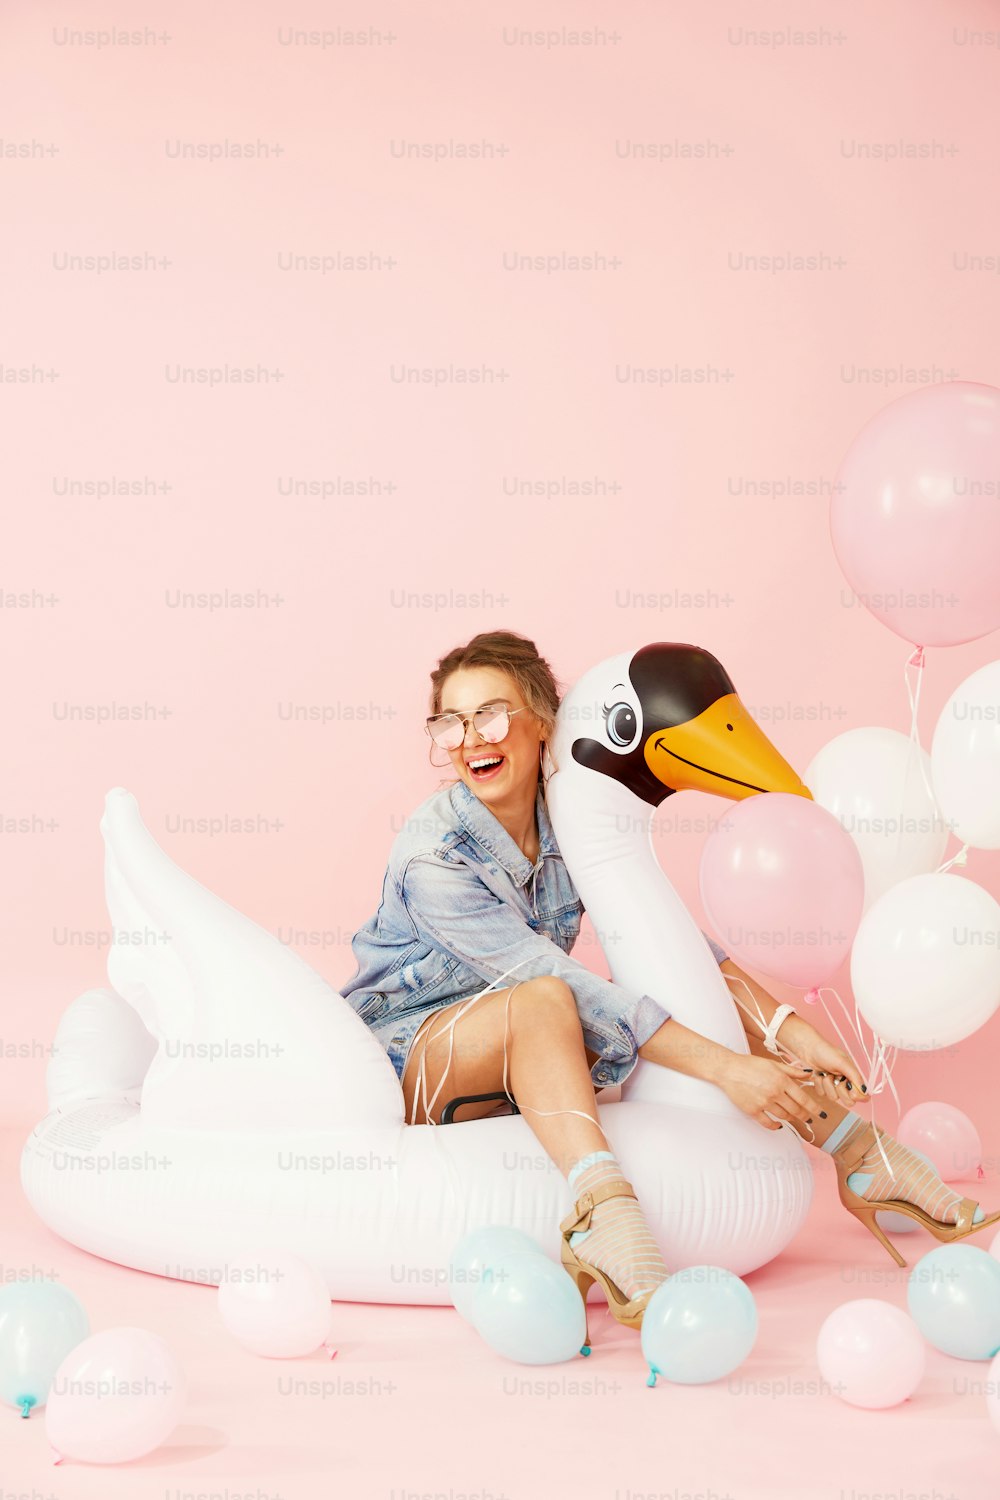 Fashion Woman In Summer Clothes Having Fun With Balloons. Happy Smiling Girl In Fashion Clothes And Stylish Sunglasses With Colorful Balloons Sitting On White Inflatable Swan Float On Pink Backgorund